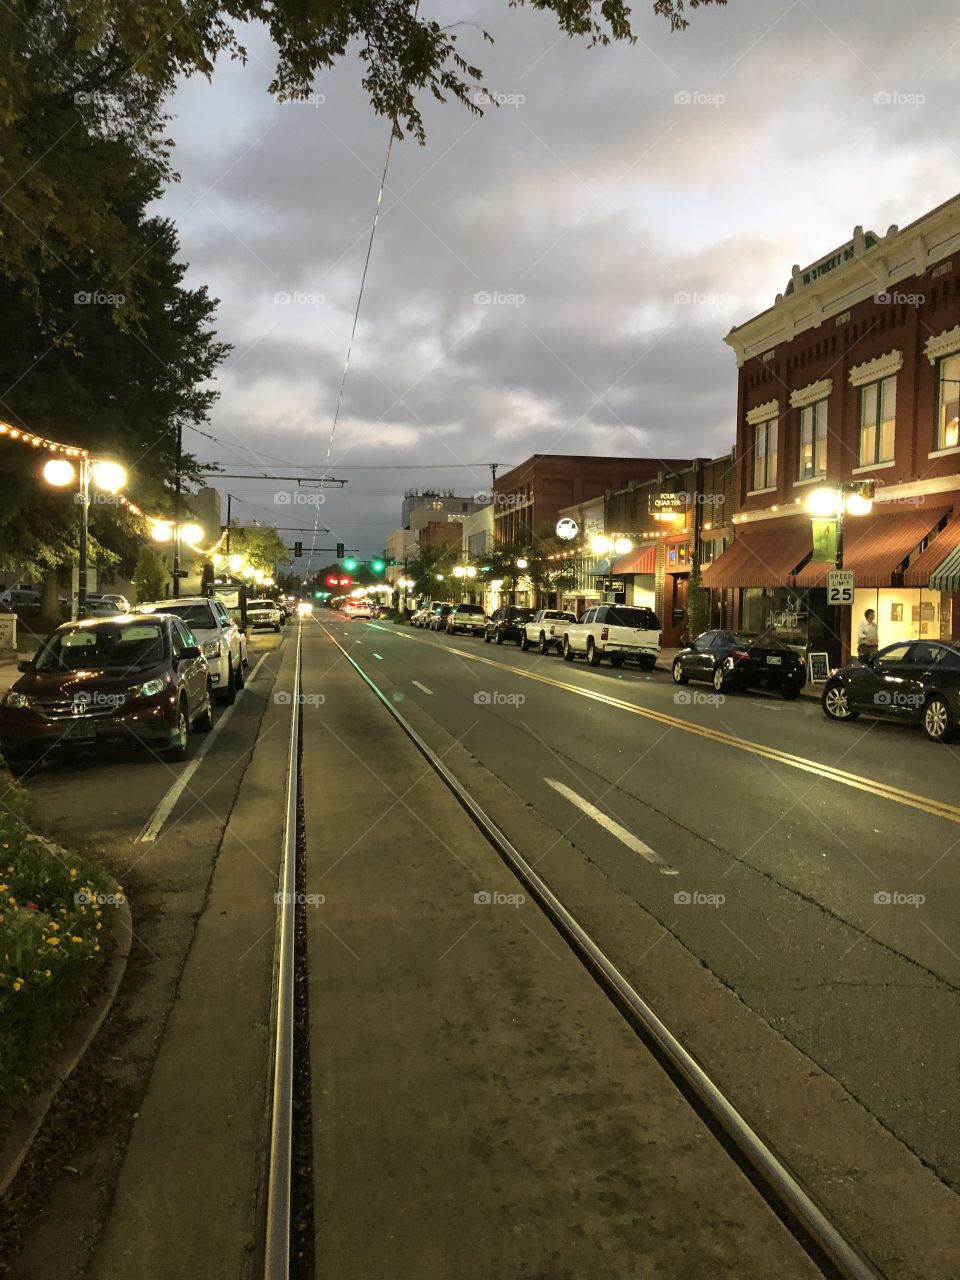 As gray storm clouds gather above, the bustling Argenta district prepares for an evening of dining out and nightlife as the street lights provides golden beams of light on the streets below. 